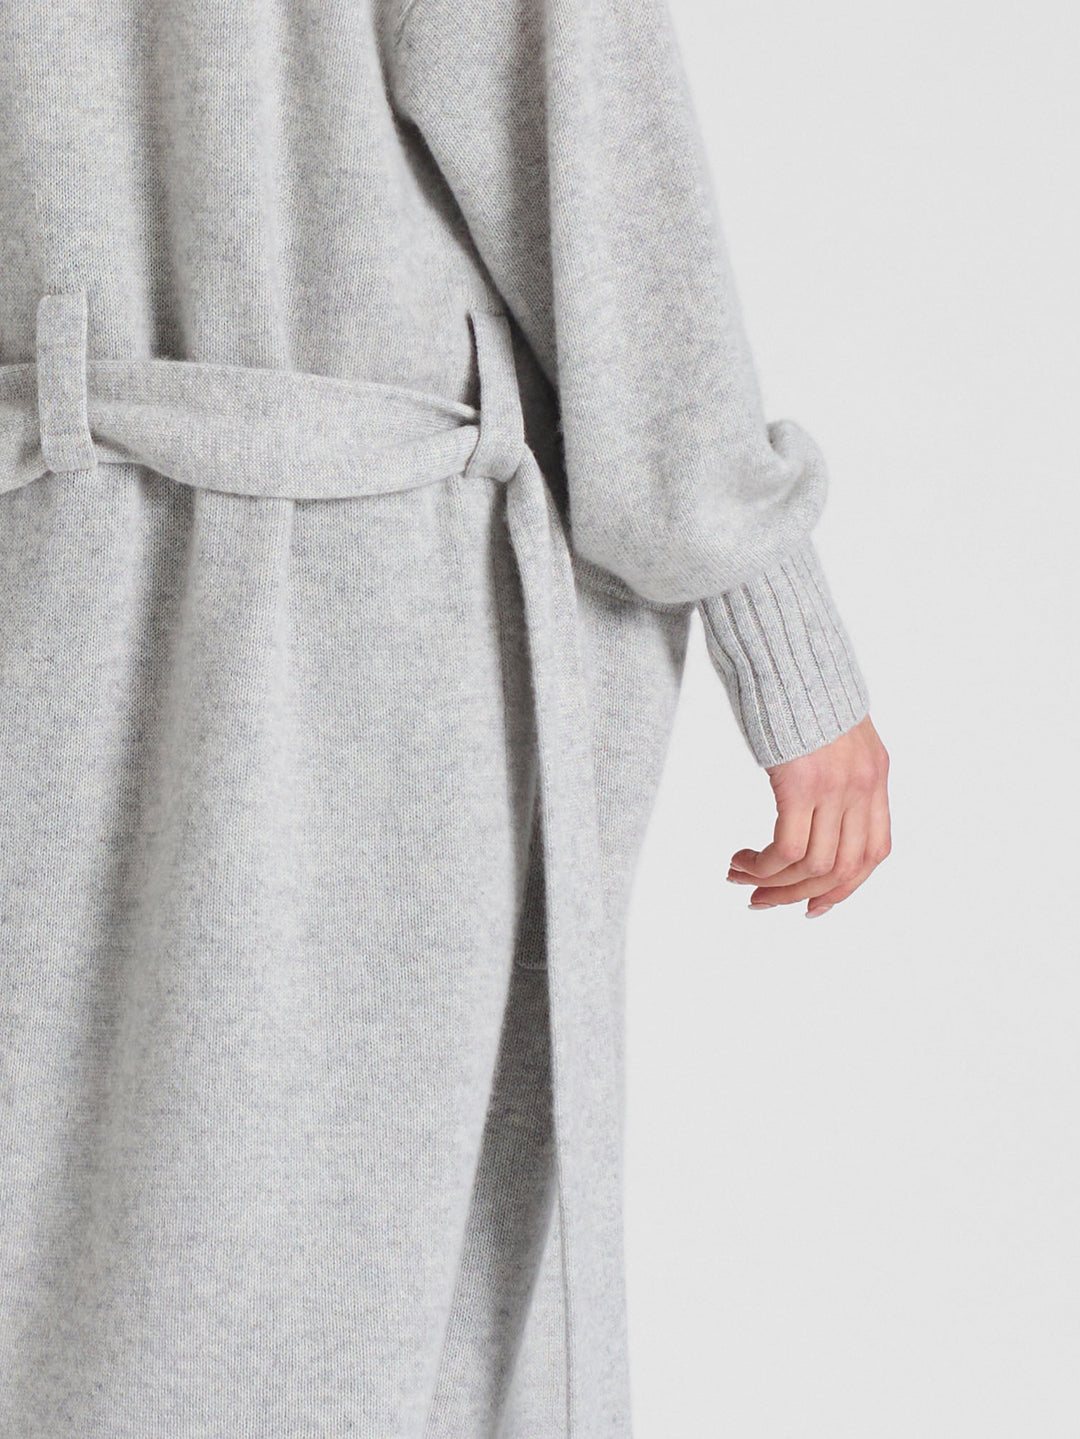 Cashmere coat "Trench" in 100% pure cashmere. Scandinavian design by Kashmina. Color:  Light Grey.